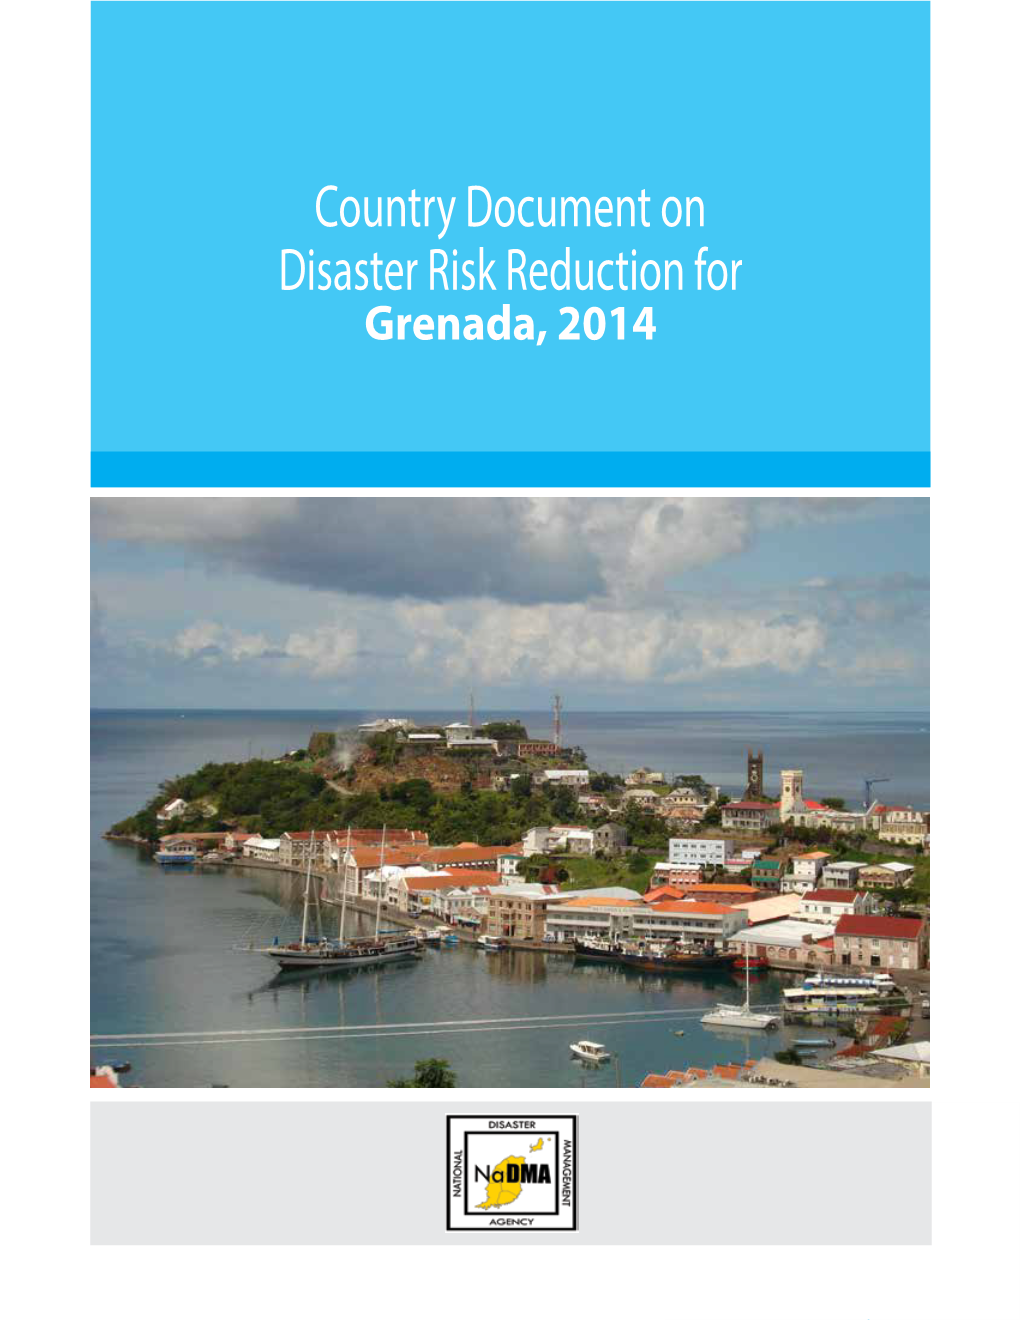 Country Document on Disaster Risk Reduction for Grenada, 2014